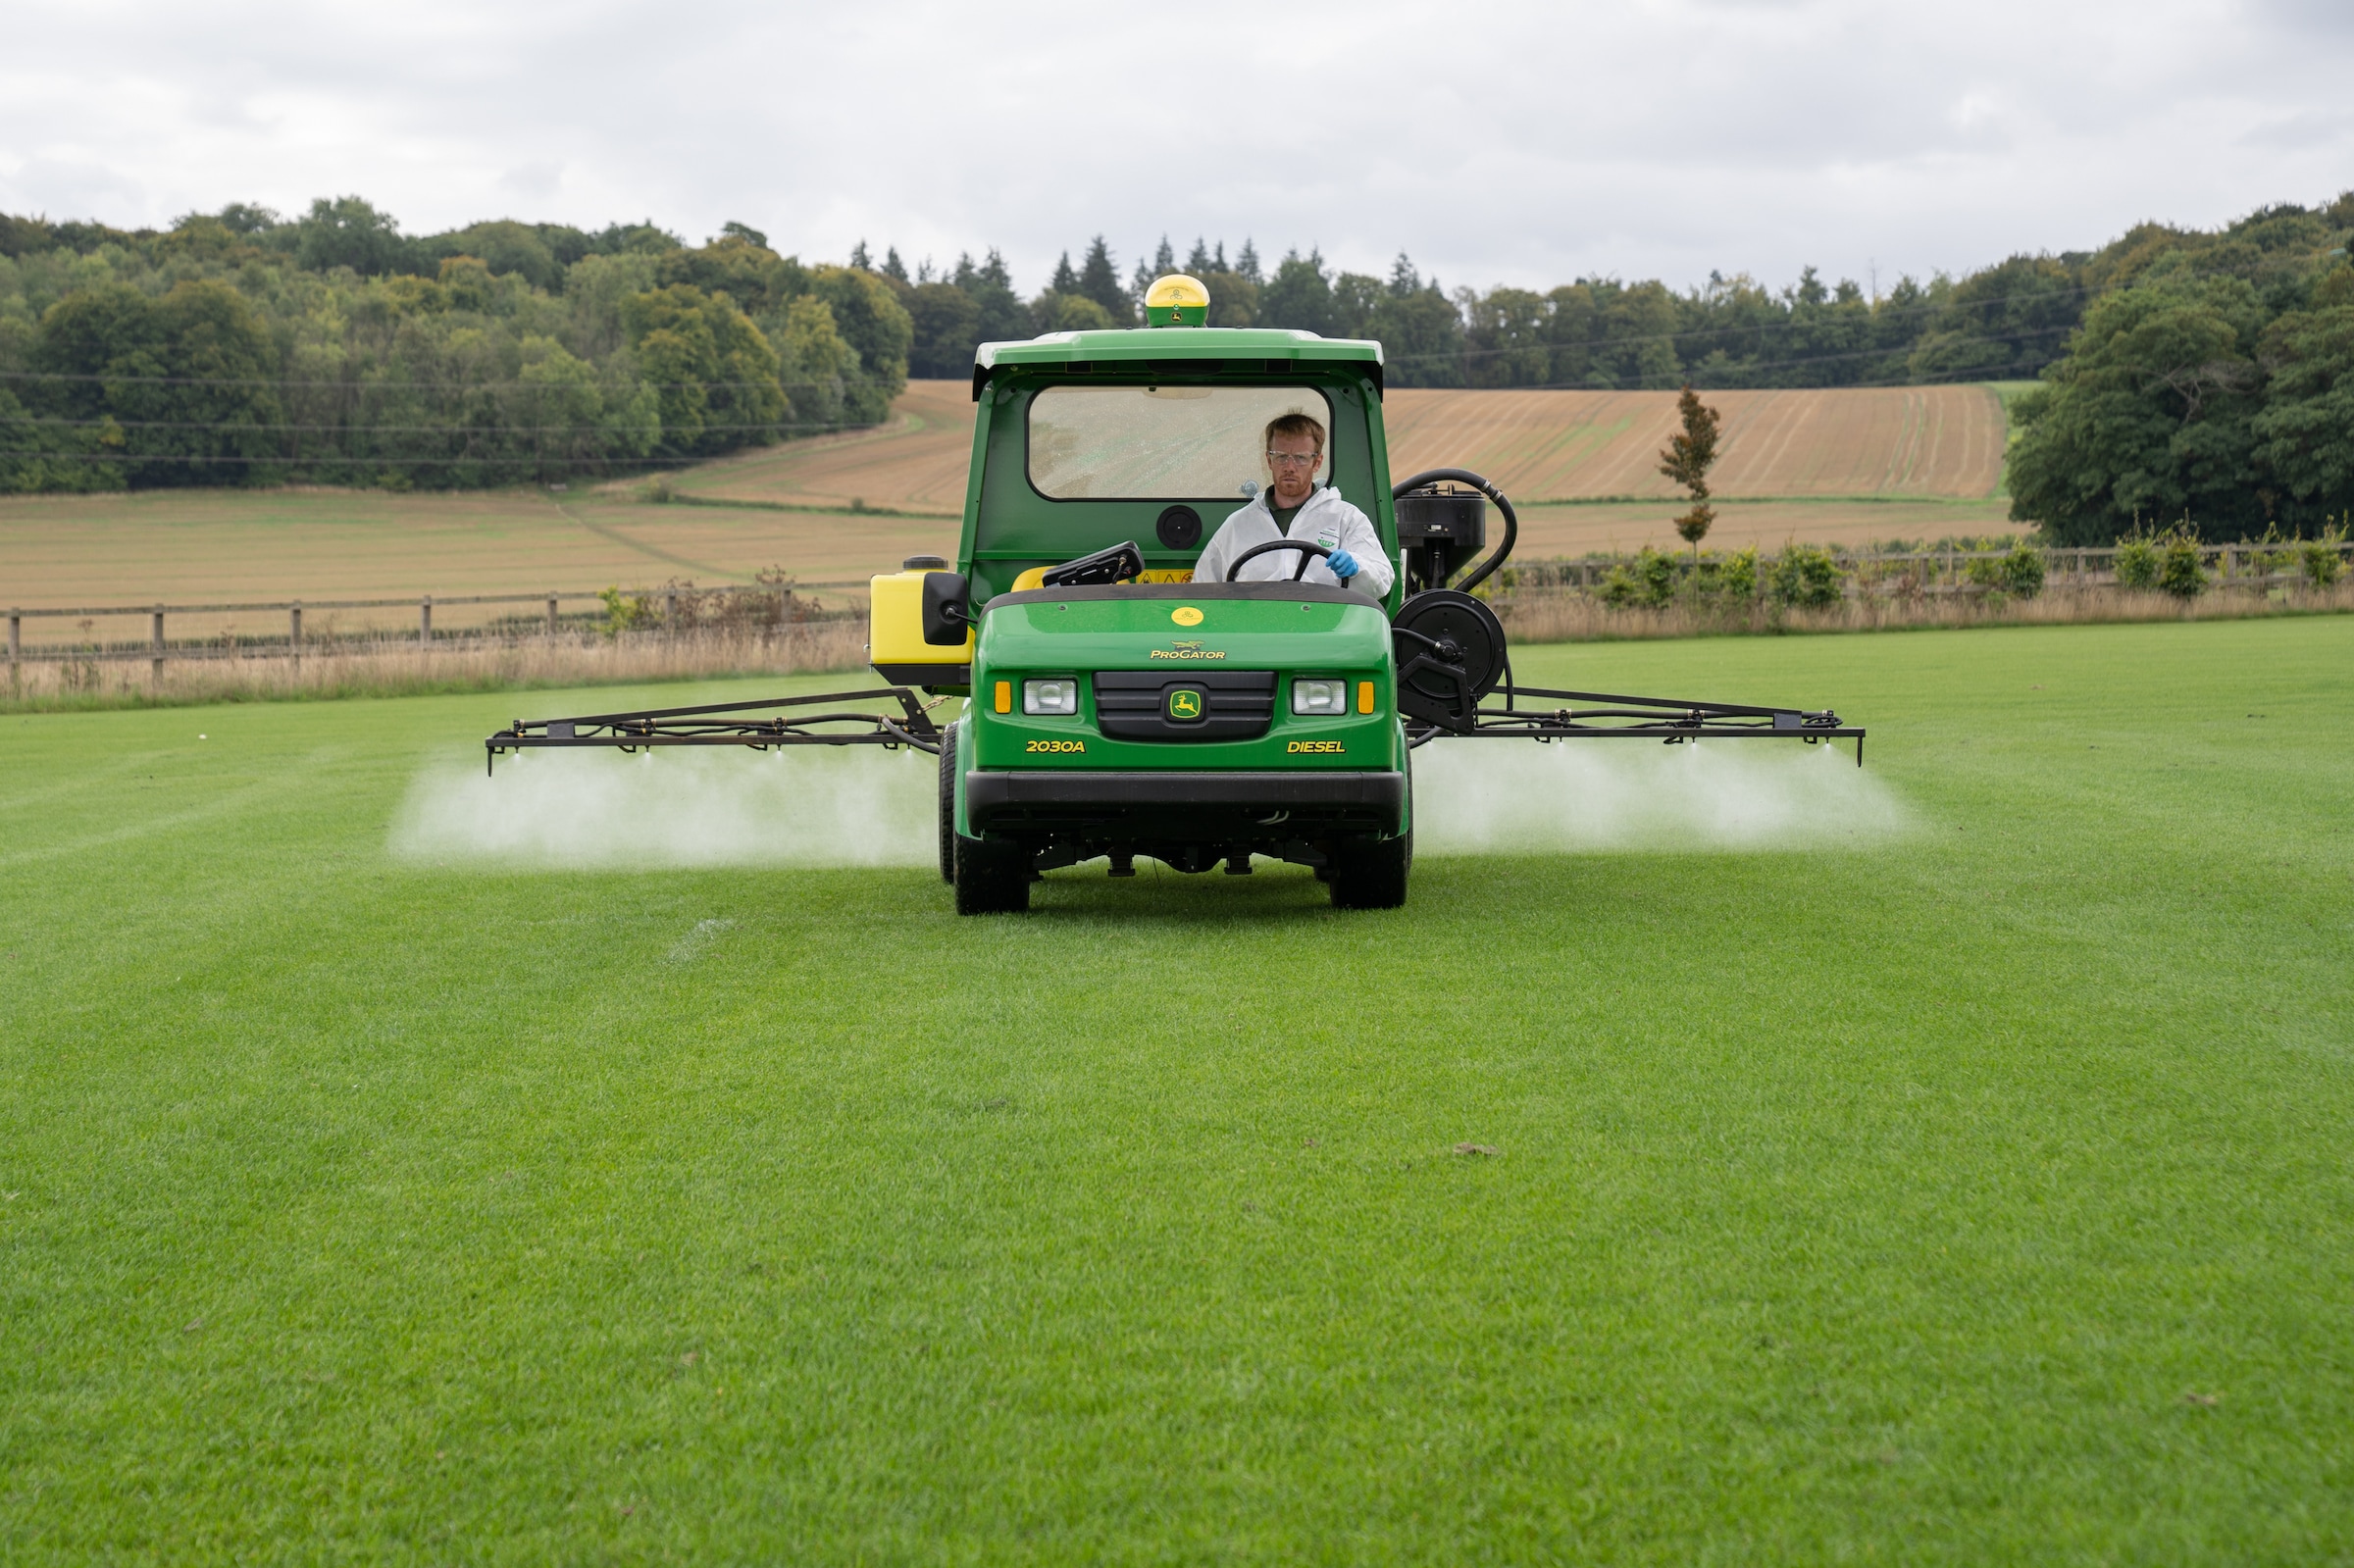 Lord Wandsworth College is one of the first independent schools to invest in a John Deere Progator GPS sprayer 